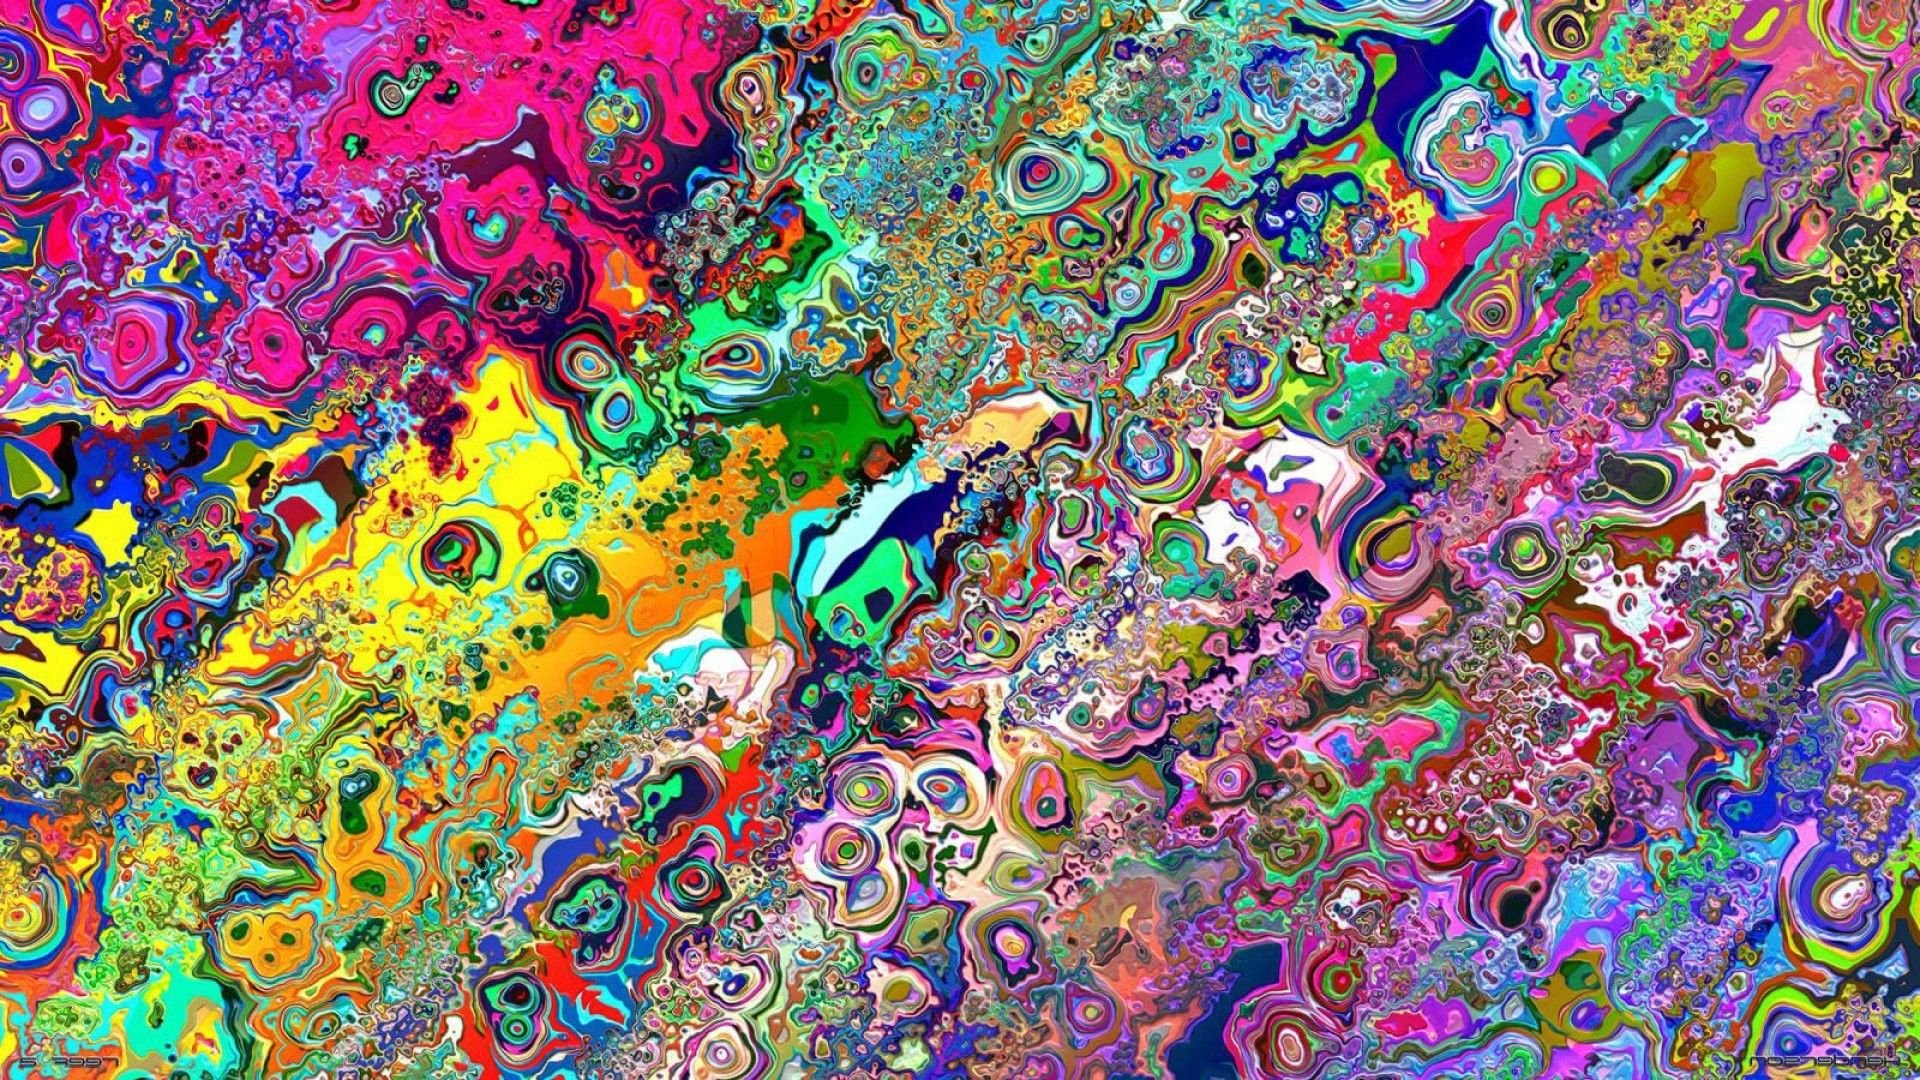 460 Artistic Psychedelic HD Wallpapers and Backgrounds